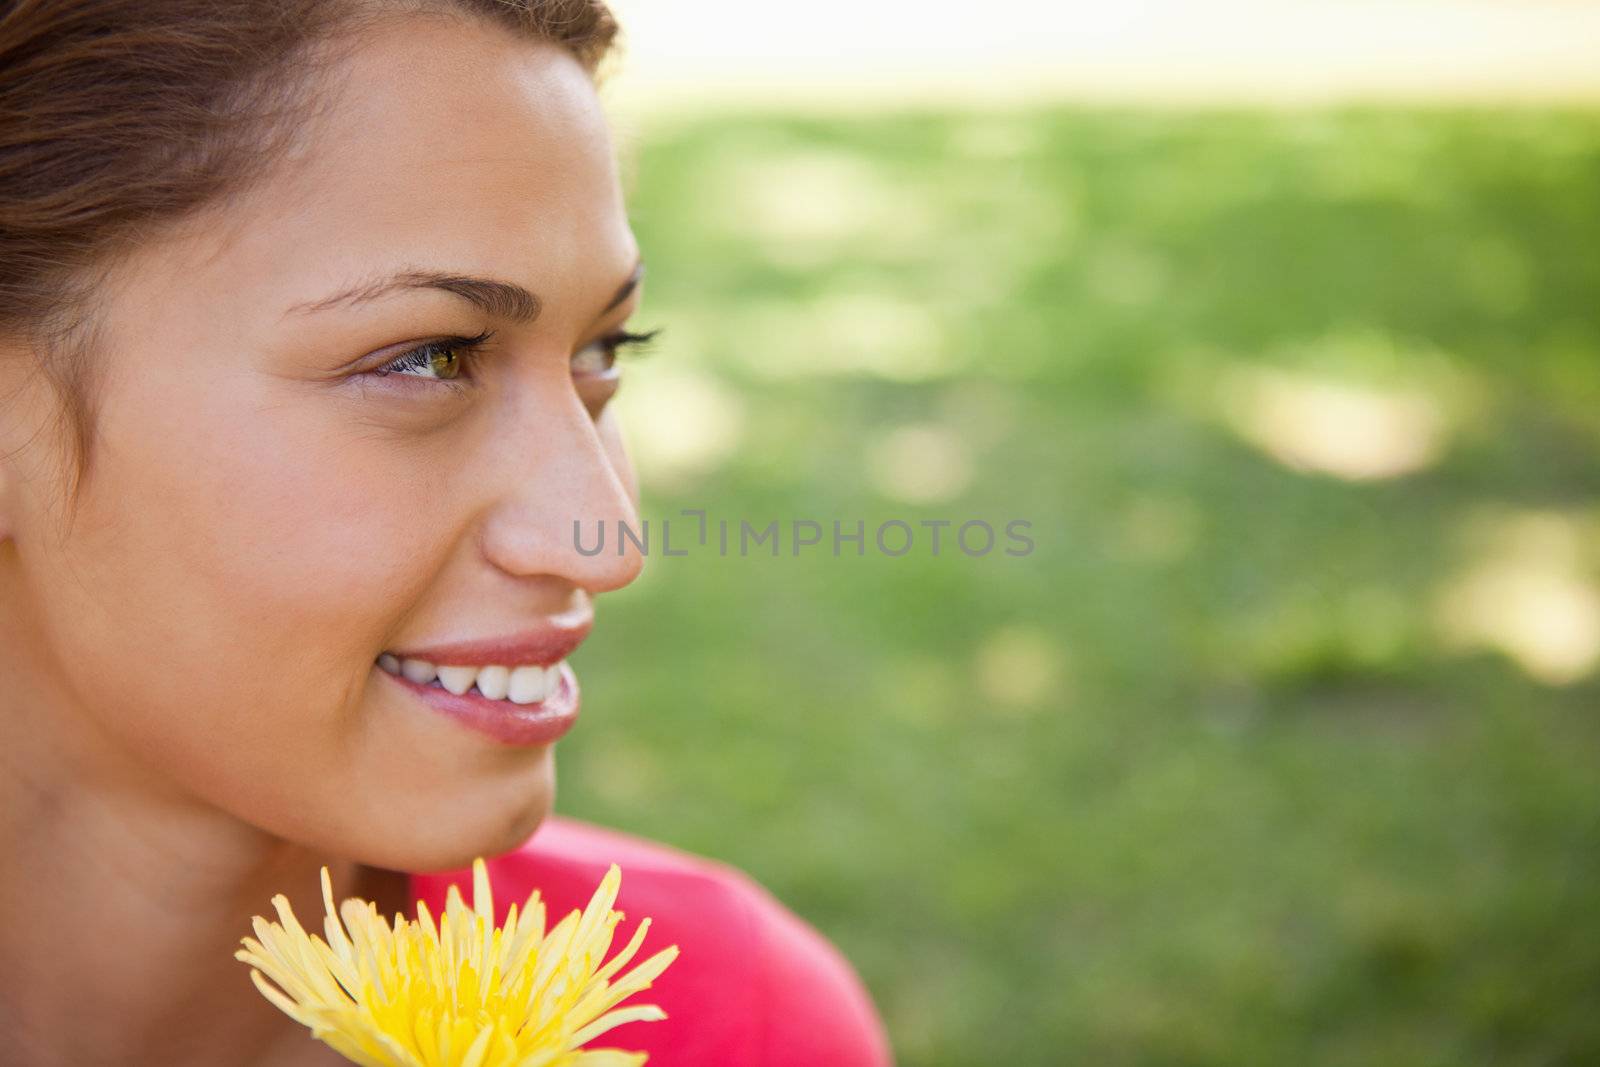 Smiling woman looking towards the side while holding a yellow flower with grass in the background